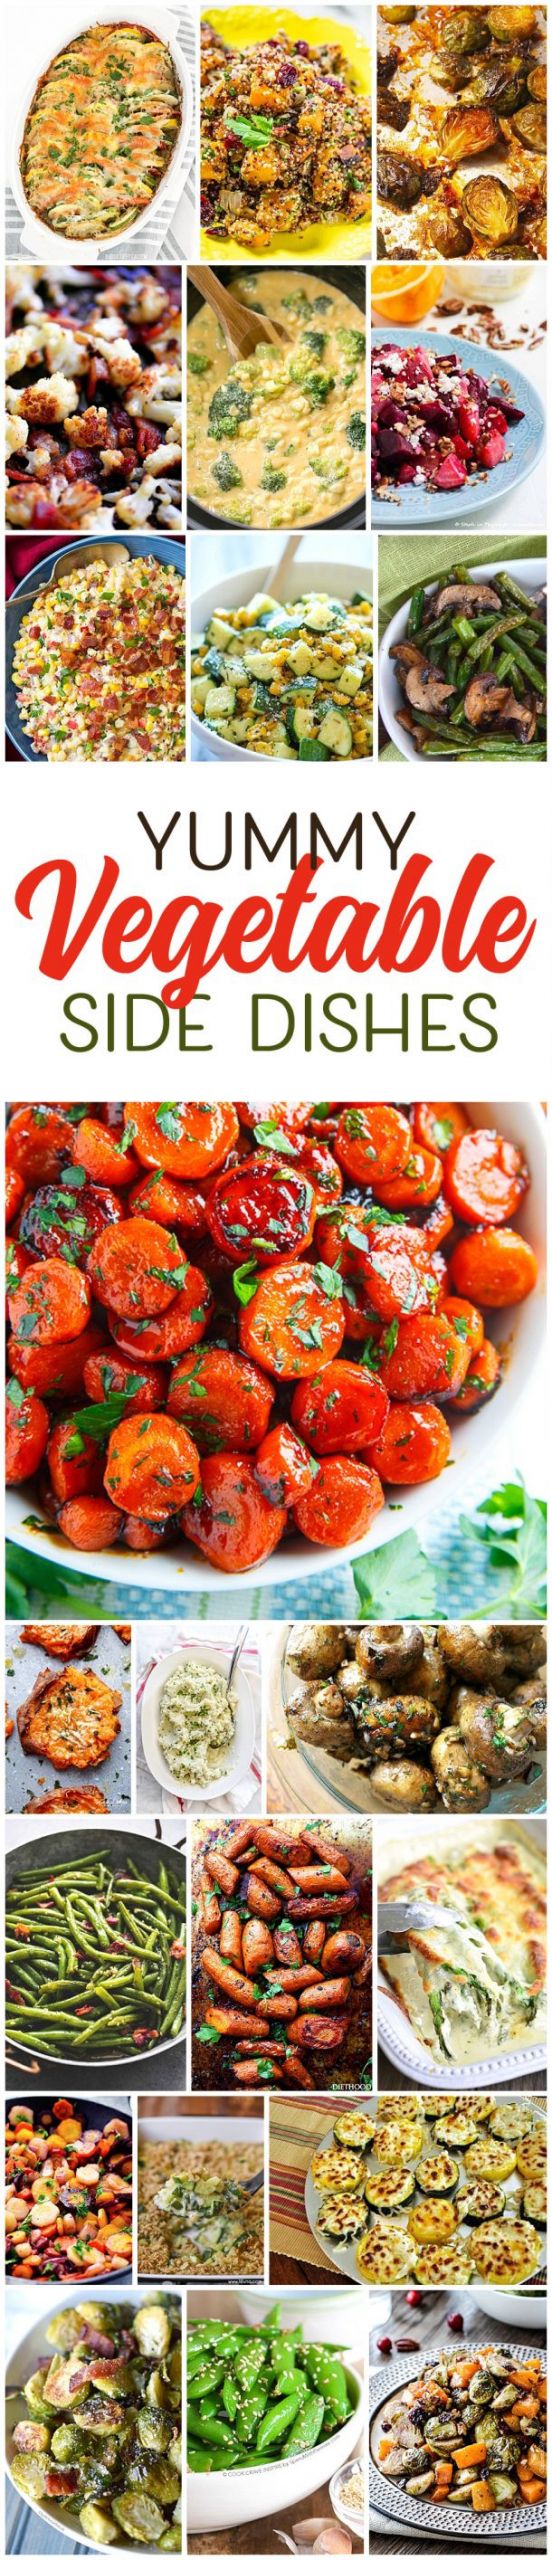 Yummy Side Dishes
 Yummy Ve able Side Dishes You Will LOVE landeelu